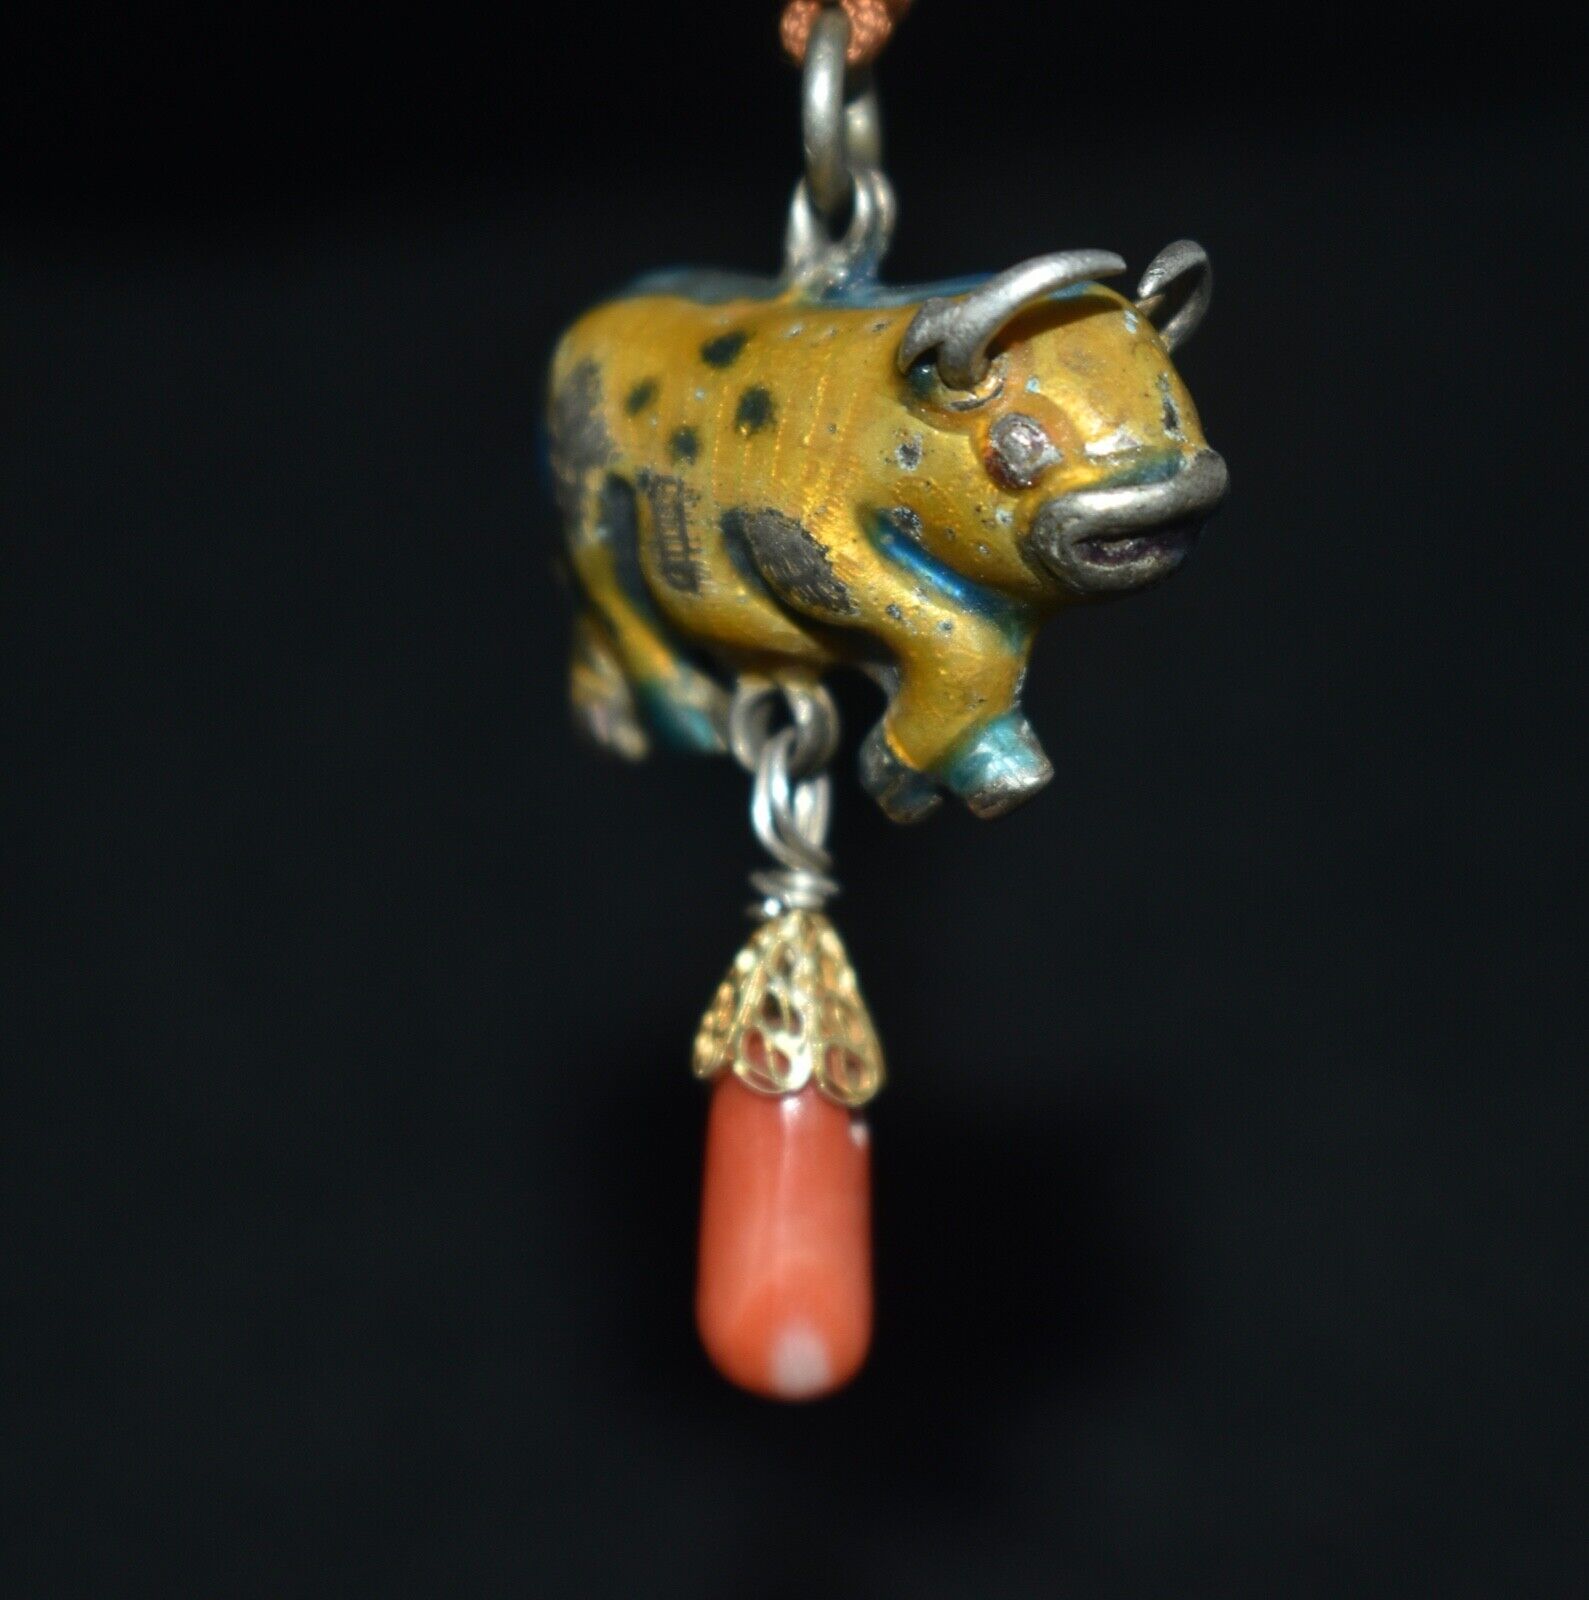 Original Ching Period Antique Chinese Cow Charm / Jewelry w/ Coral Adornment